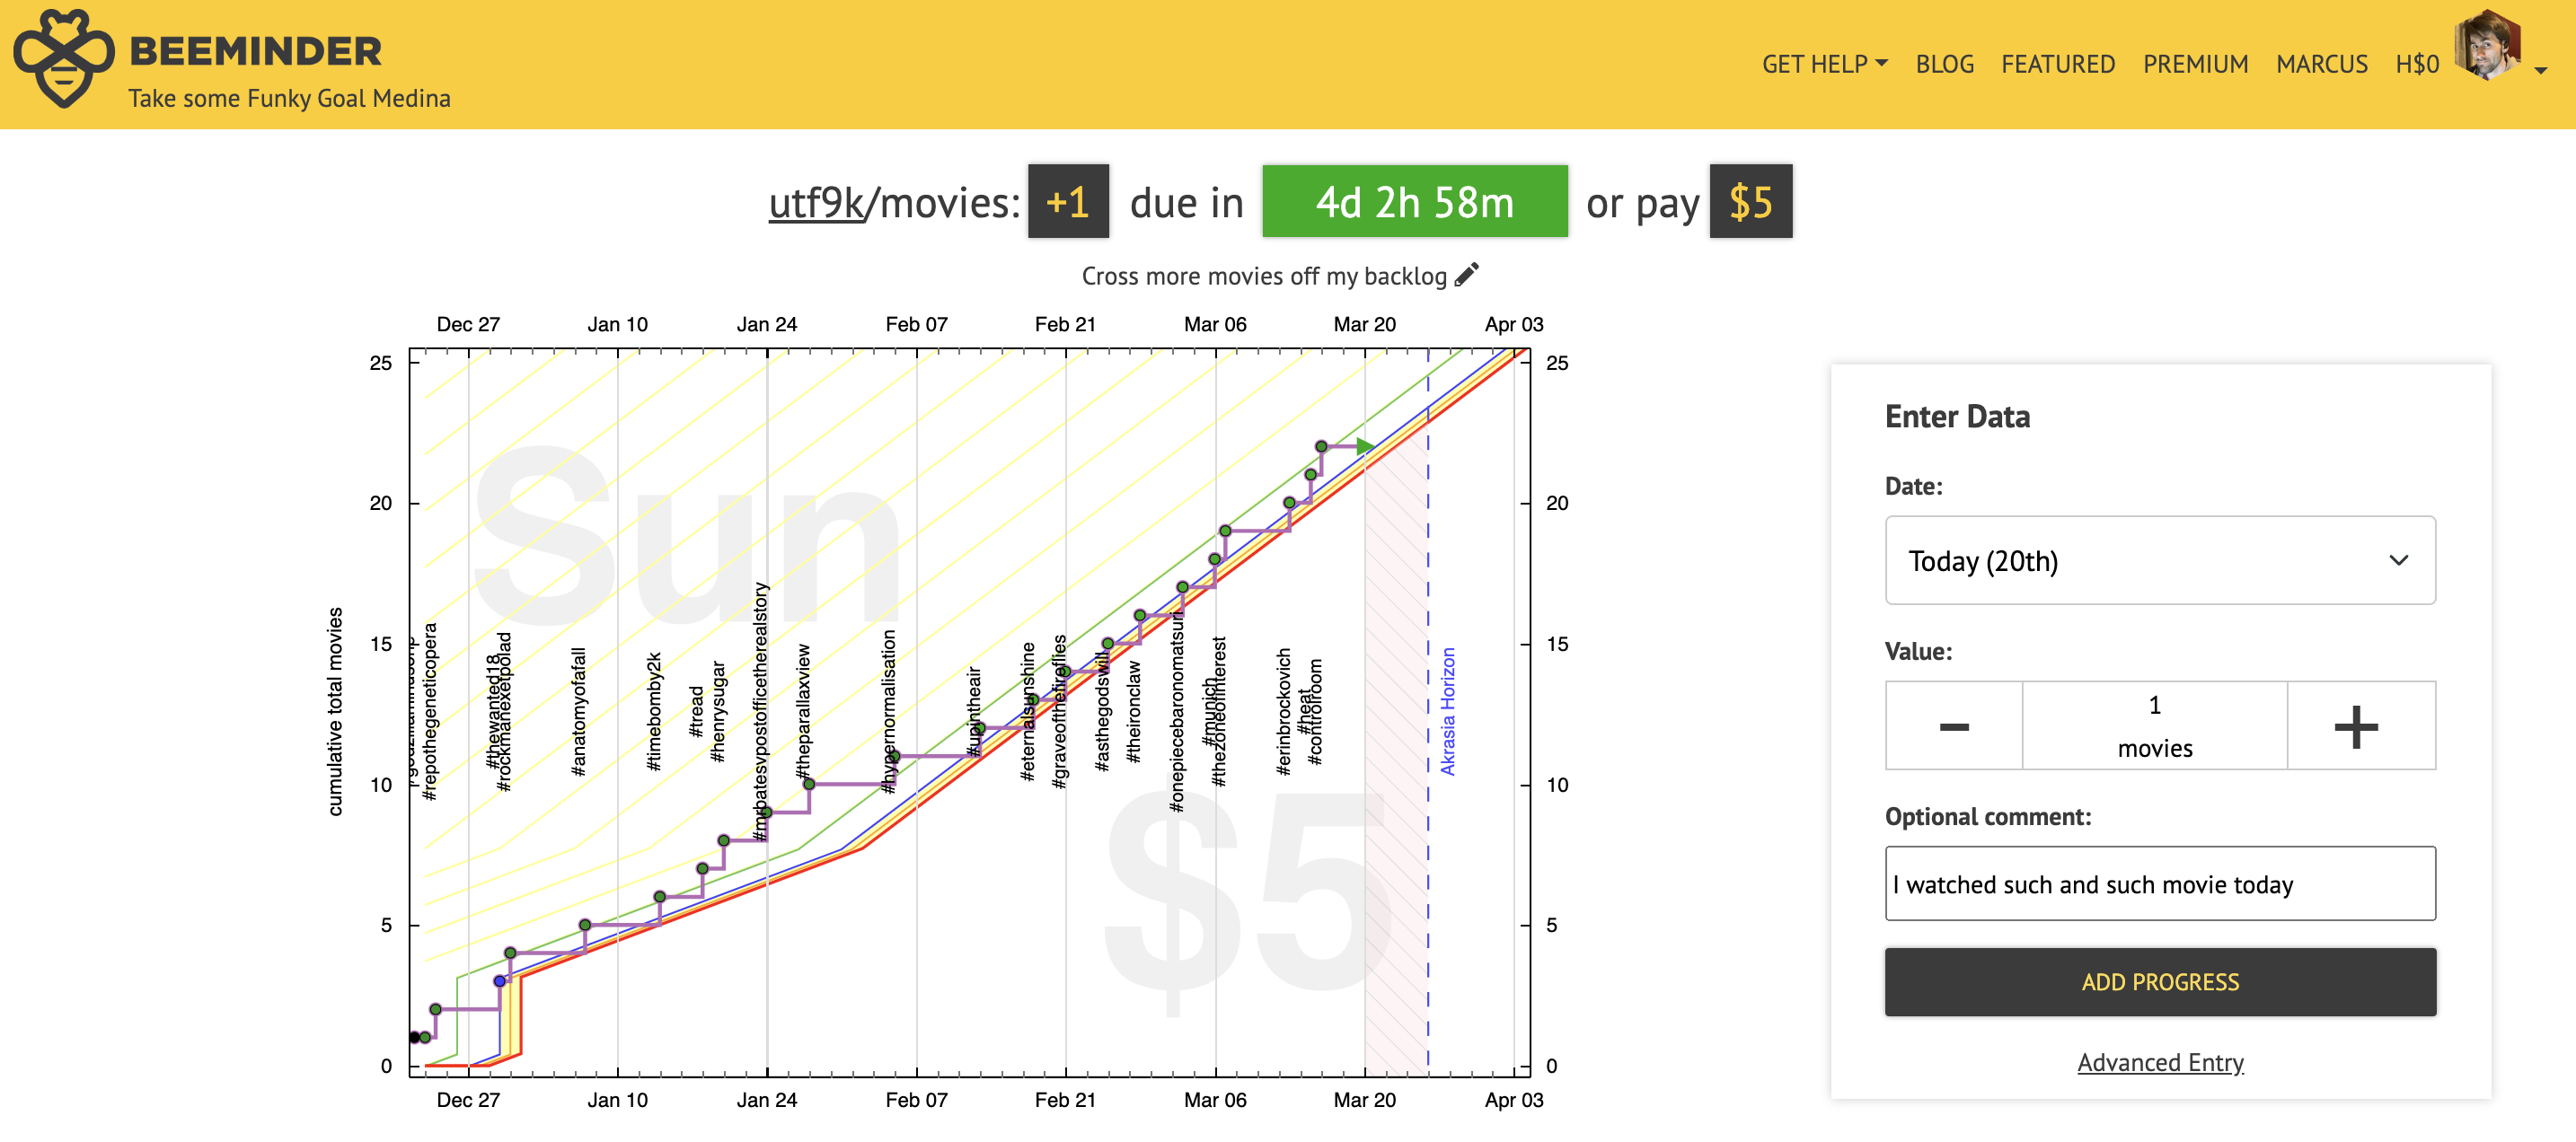 A screenshot of the Beeminder UI showing a step graph with datapoints entered every few days. The goal is watching movies.